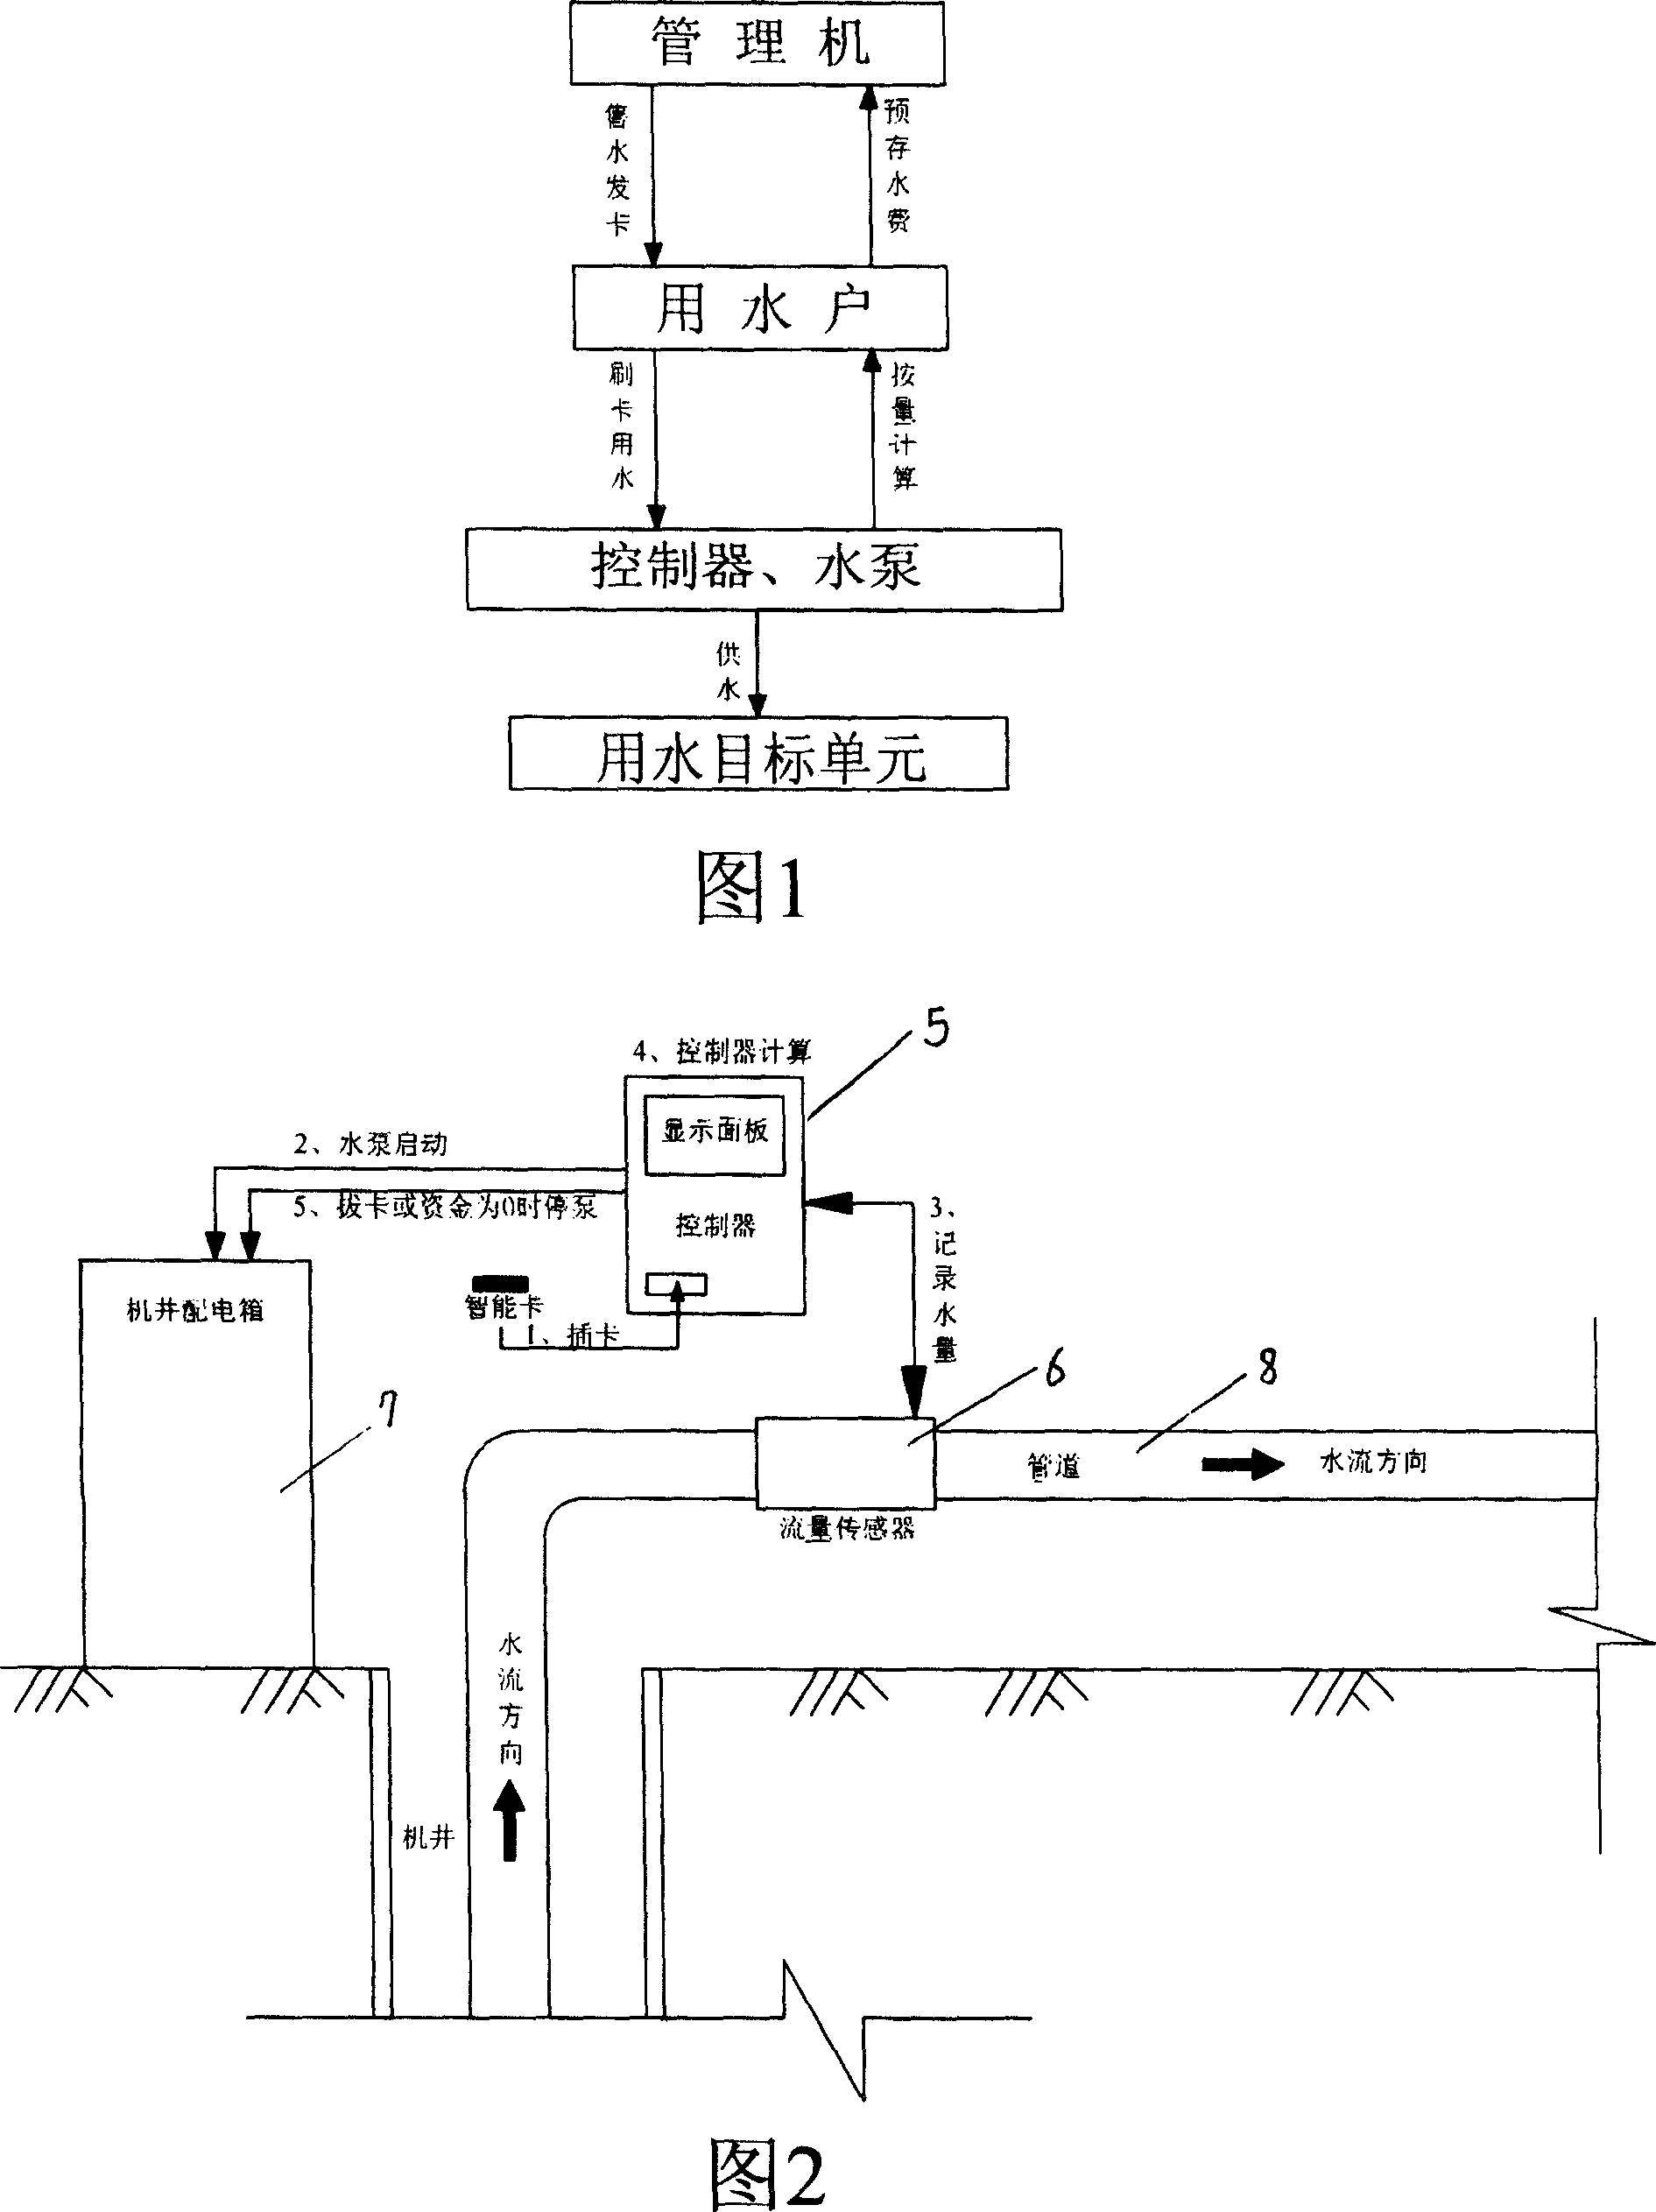 Automatic charging control system for water supply of motor-pumped well